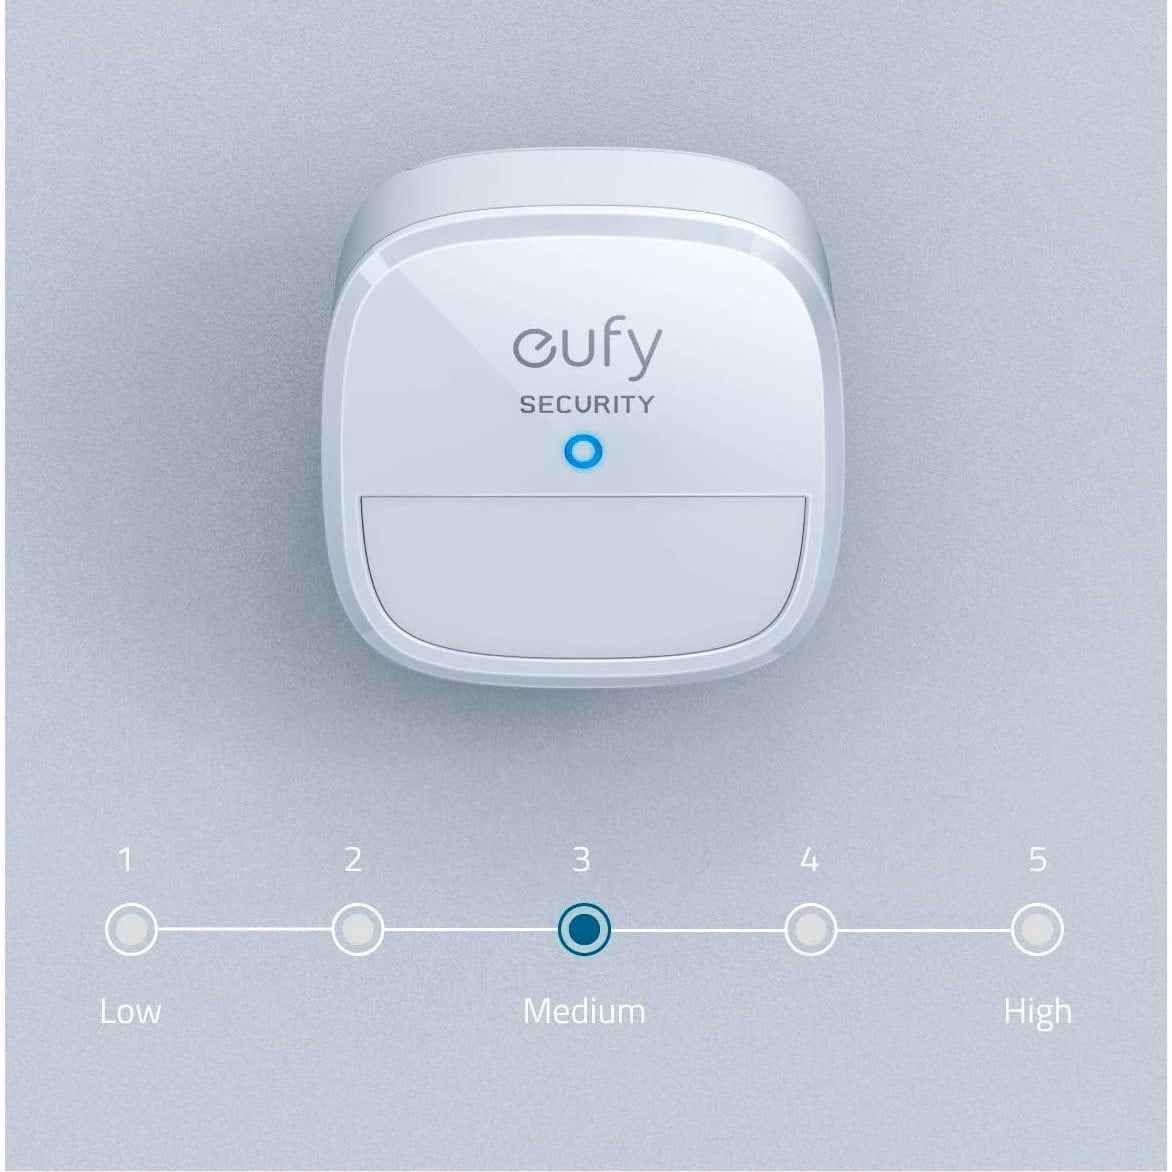 6414441Cv18D 1 Eufy &Lt;H1&Gt;Eufy Smart Home Motion Sensor Add-On - White&Lt;/H1&Gt; Https://Www.youtube.com/Watch?V=Pswixljarbs Protect Your Home With This Eufy Security Home Security Alarm Motion Sensor. A 30-Foot Range And 100-Degree Radius Make It Ideal For A Range Of Setups. The Eufy App Alerts You Via Smartphone The Instant Movement Is Detected, And A Sensor Easily Connects With Other Eufy Home Security Products And Adjusts To Accommodate Pets. With A 2-Year Battery Life, This Eufy Home Security Alarm Motion Sensor Provides Long-Term Security. Motion Sensor Eufy Smart Home Motion Sensor Add-On - White